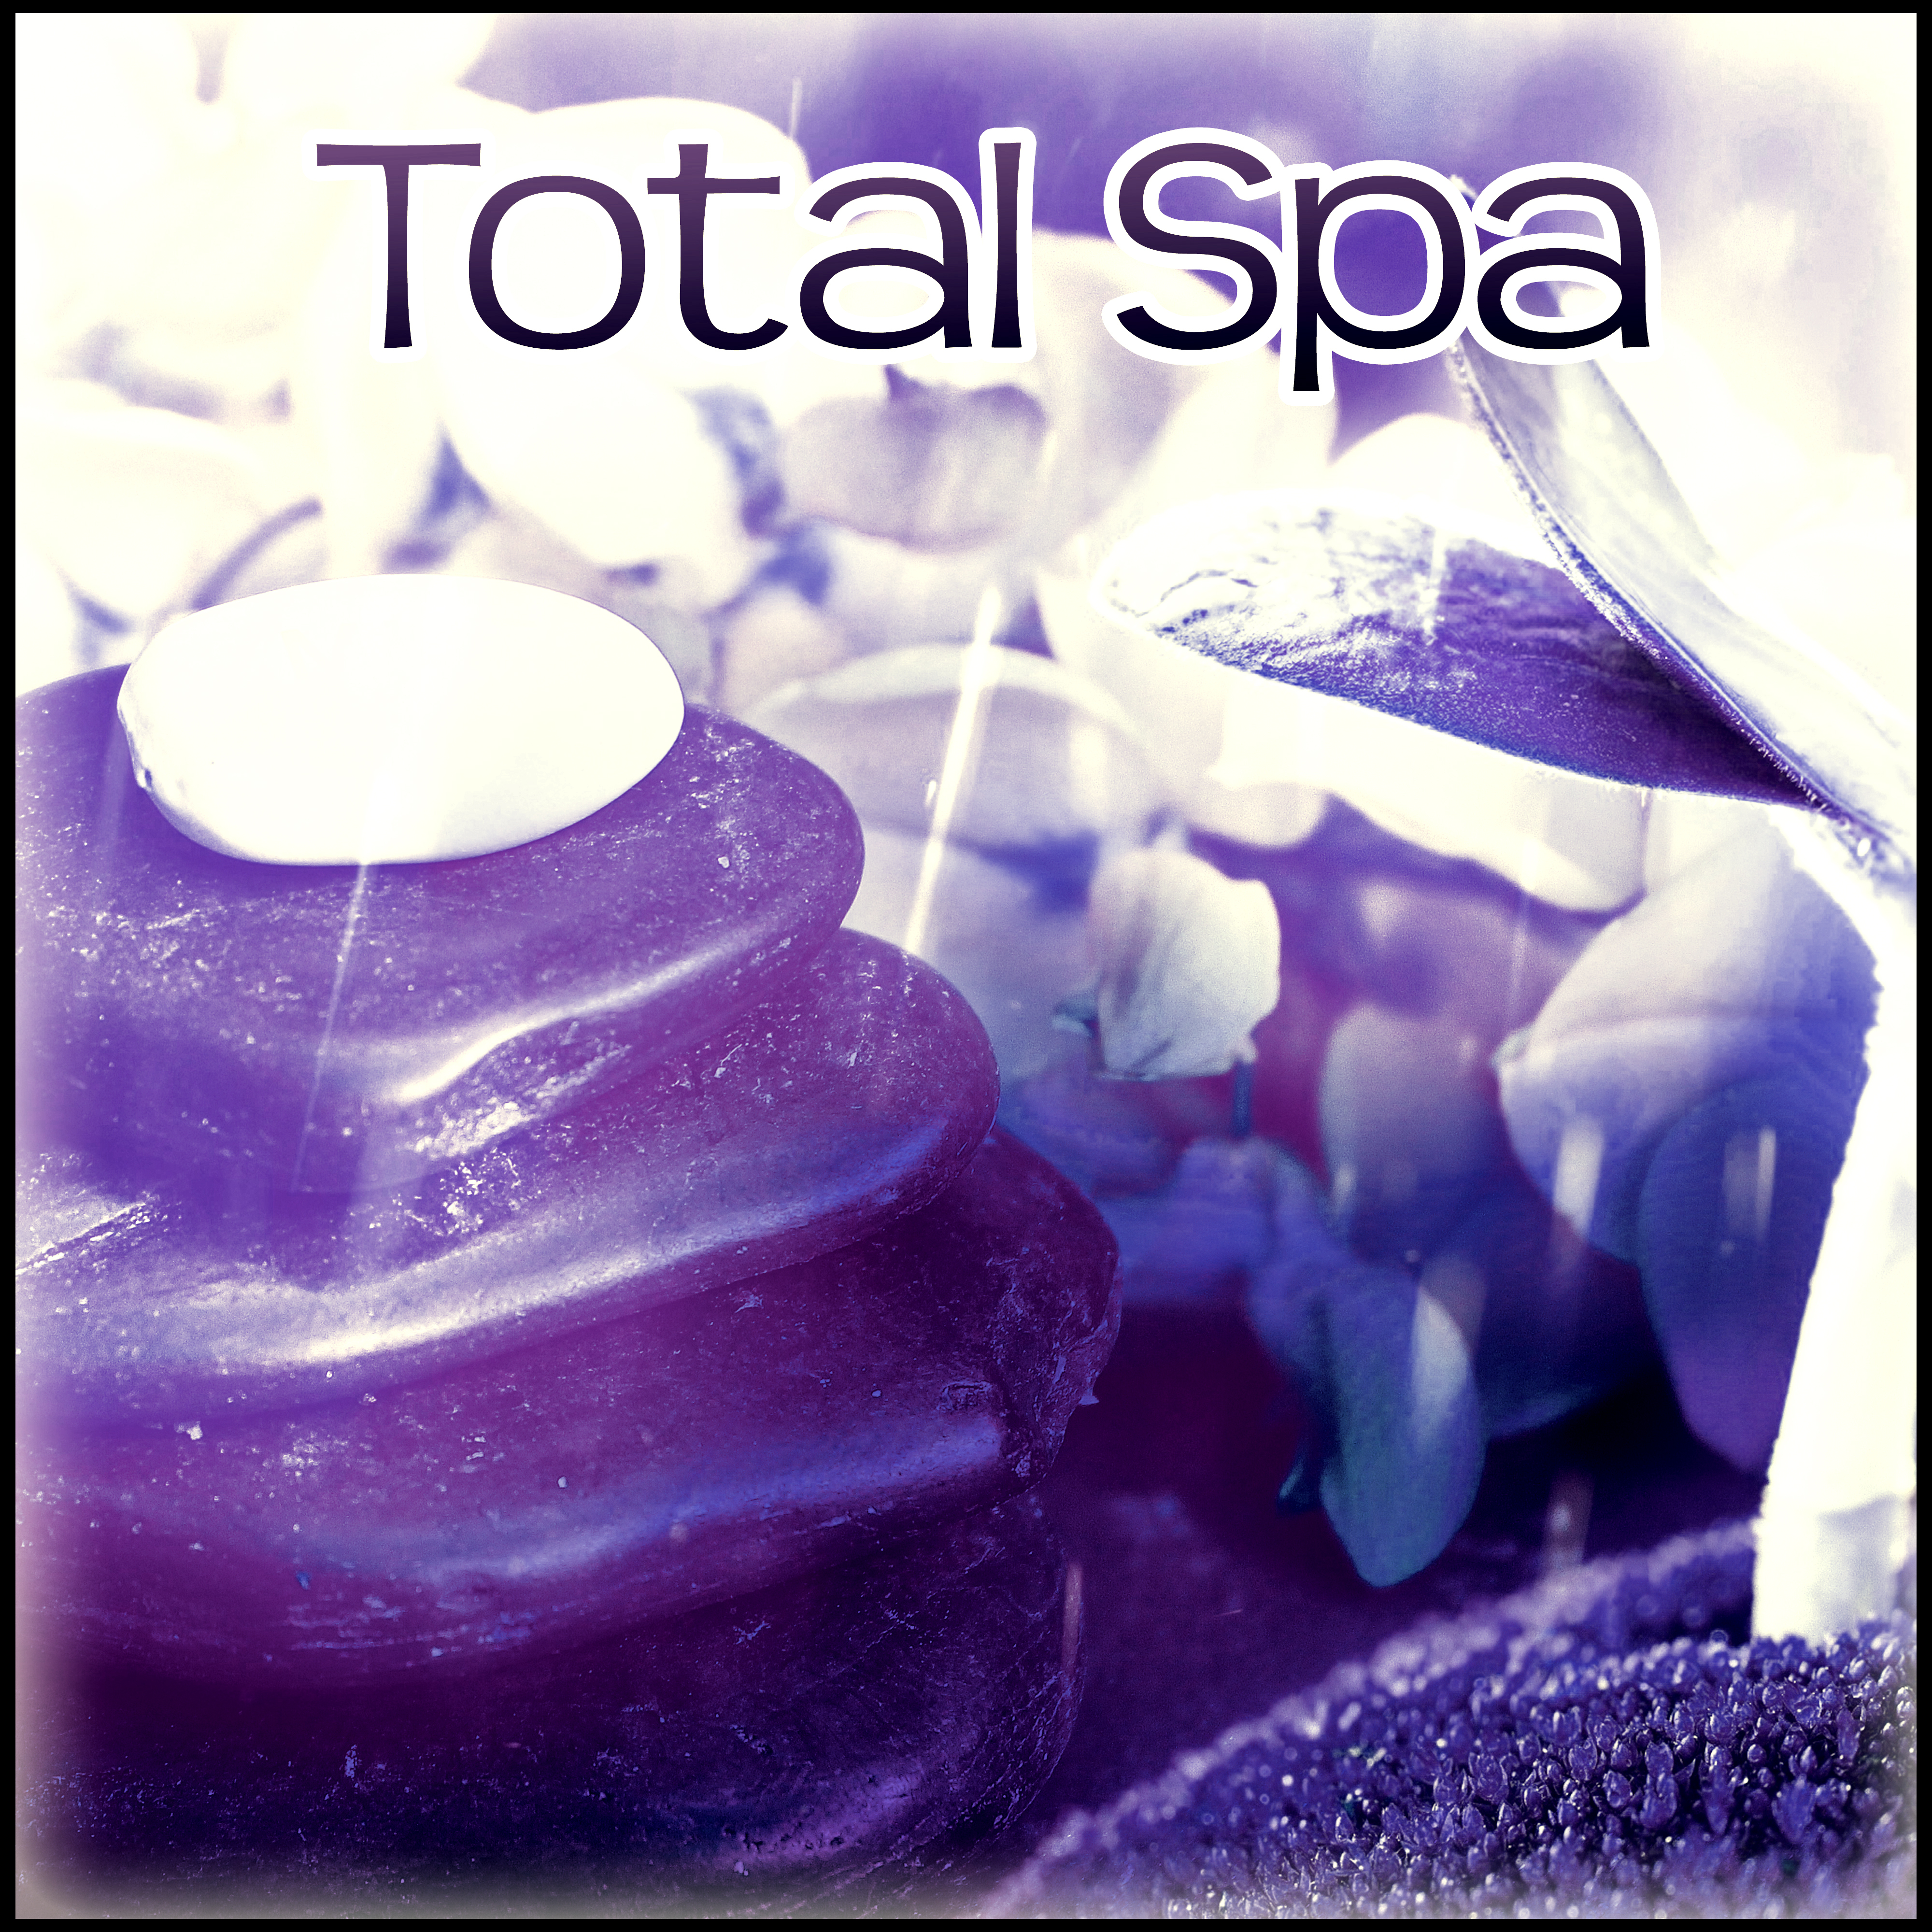 Total Spa – New Age Music for Wellness & Beauty Tratments,  New Age Relaxation, Nature Sounds and Spa Dreams, Relaxation Music, Zen Music